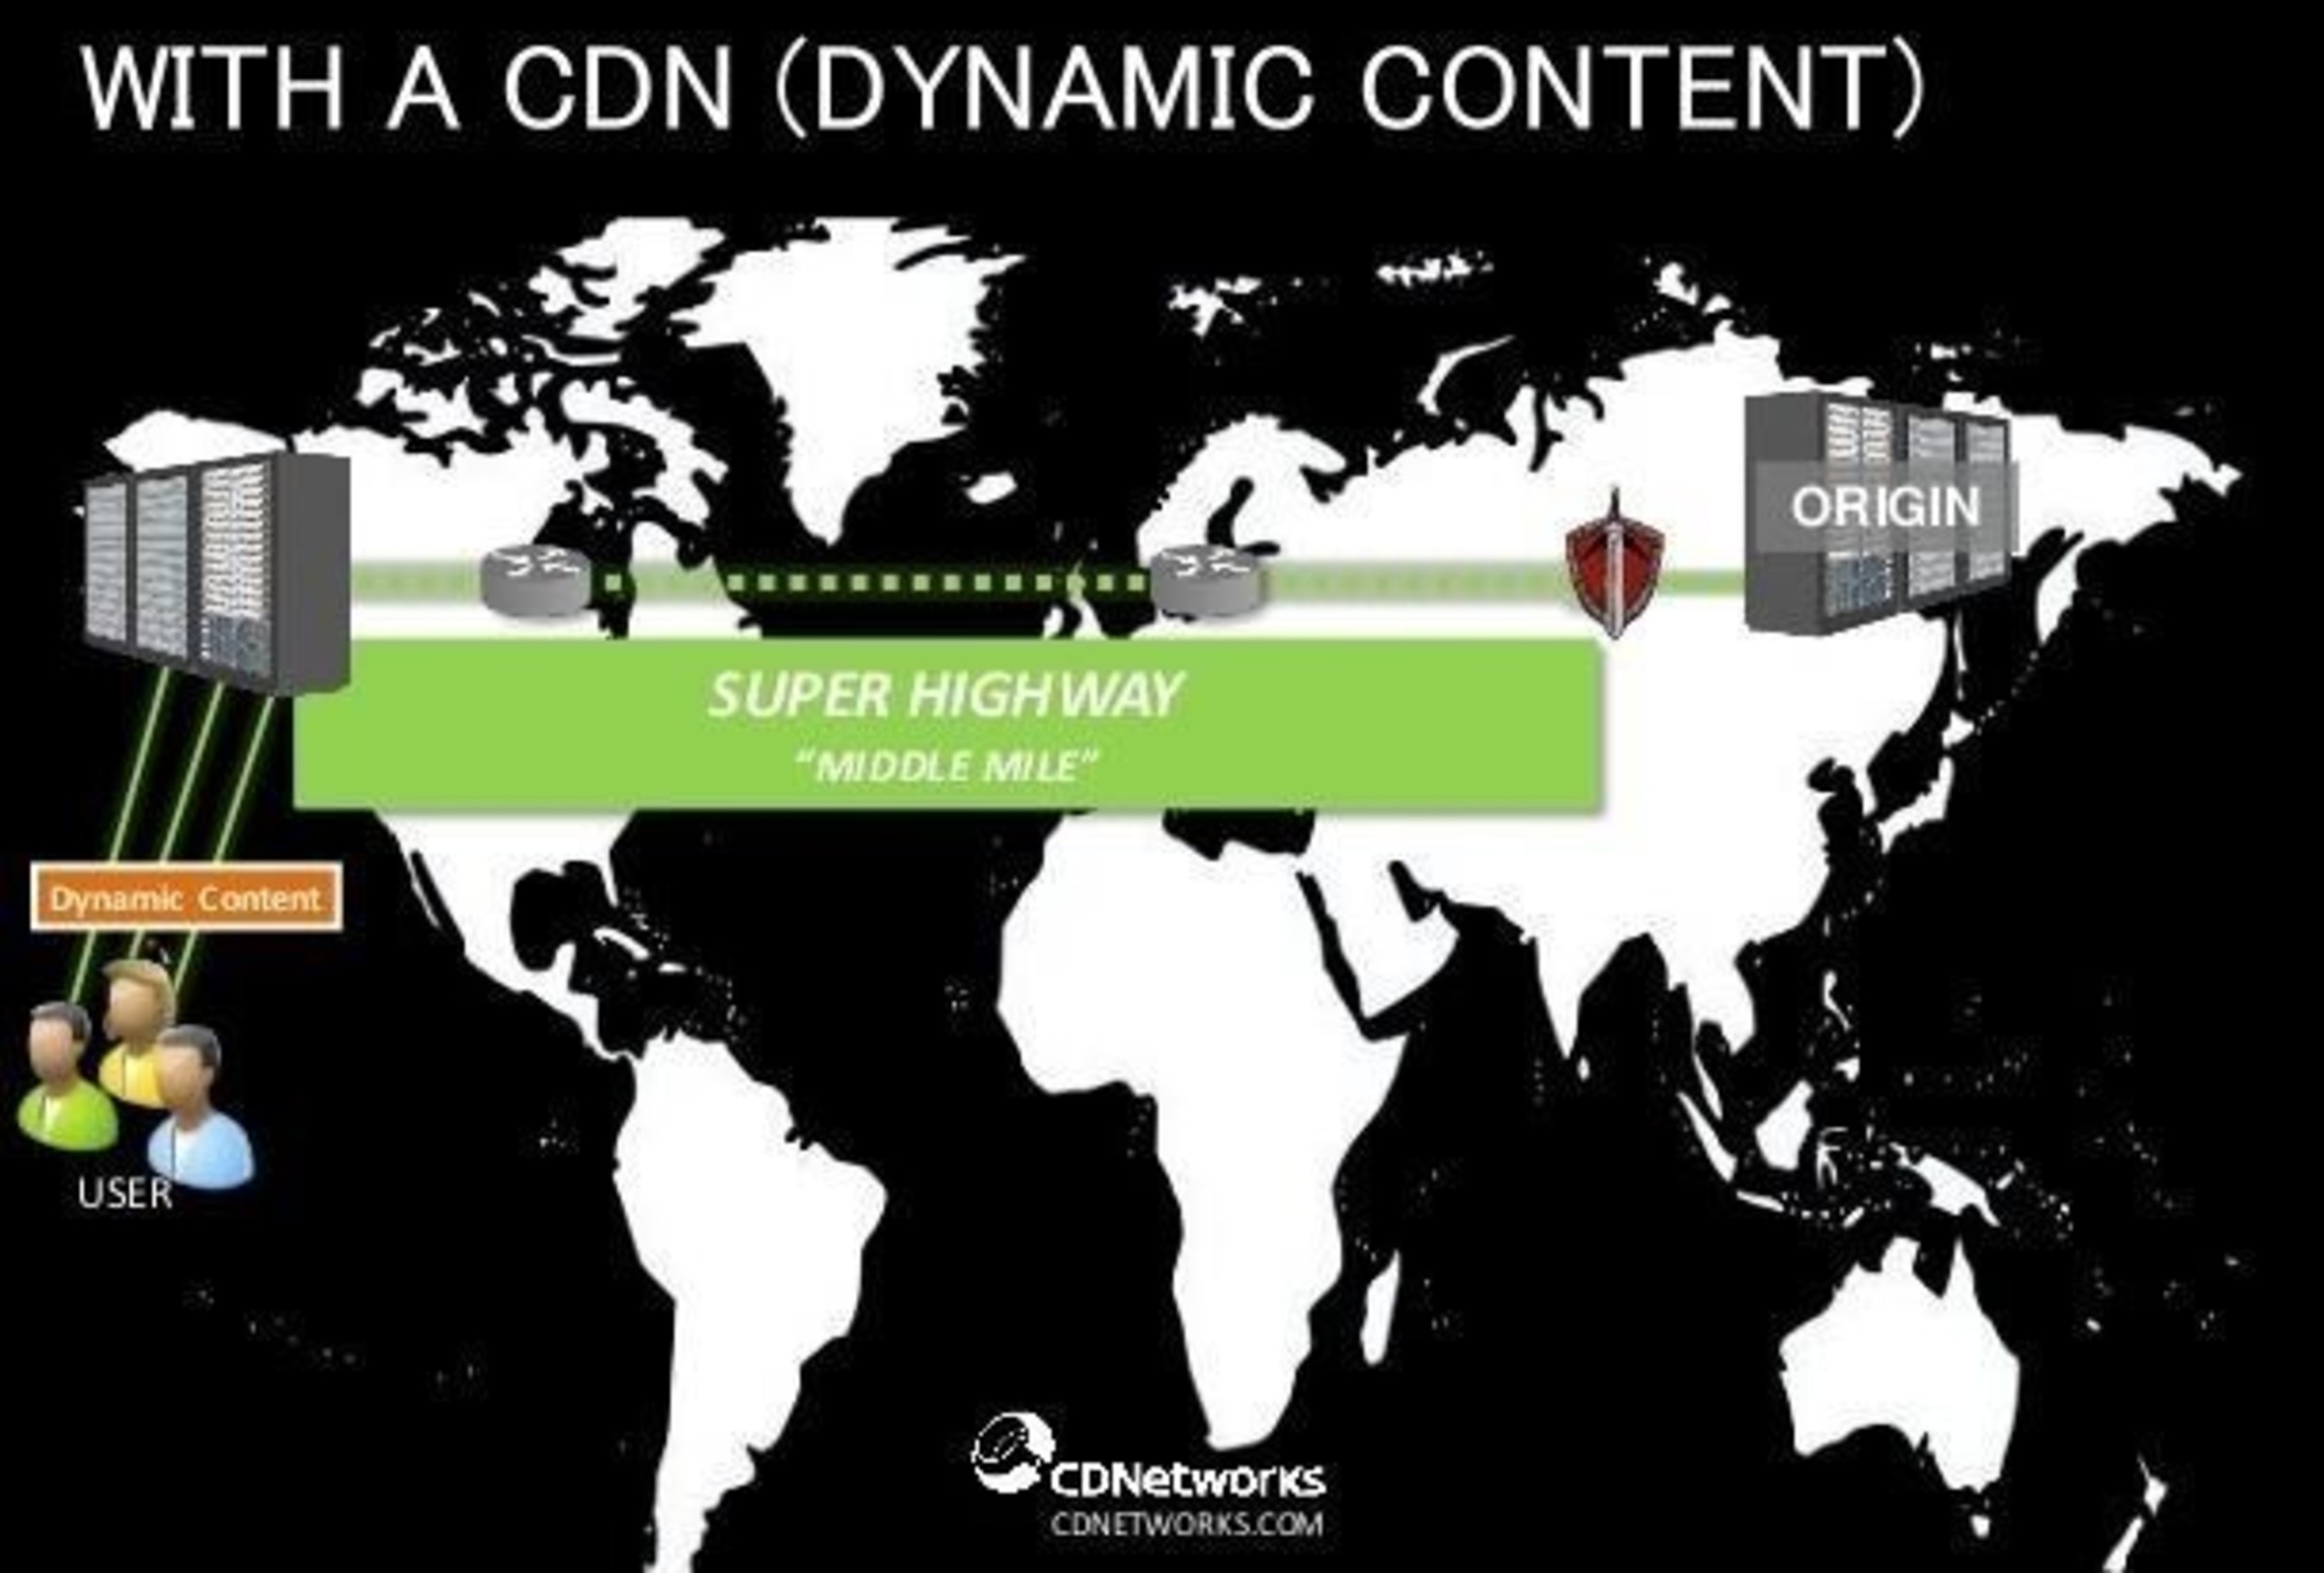 With a CDN Dynamic Content